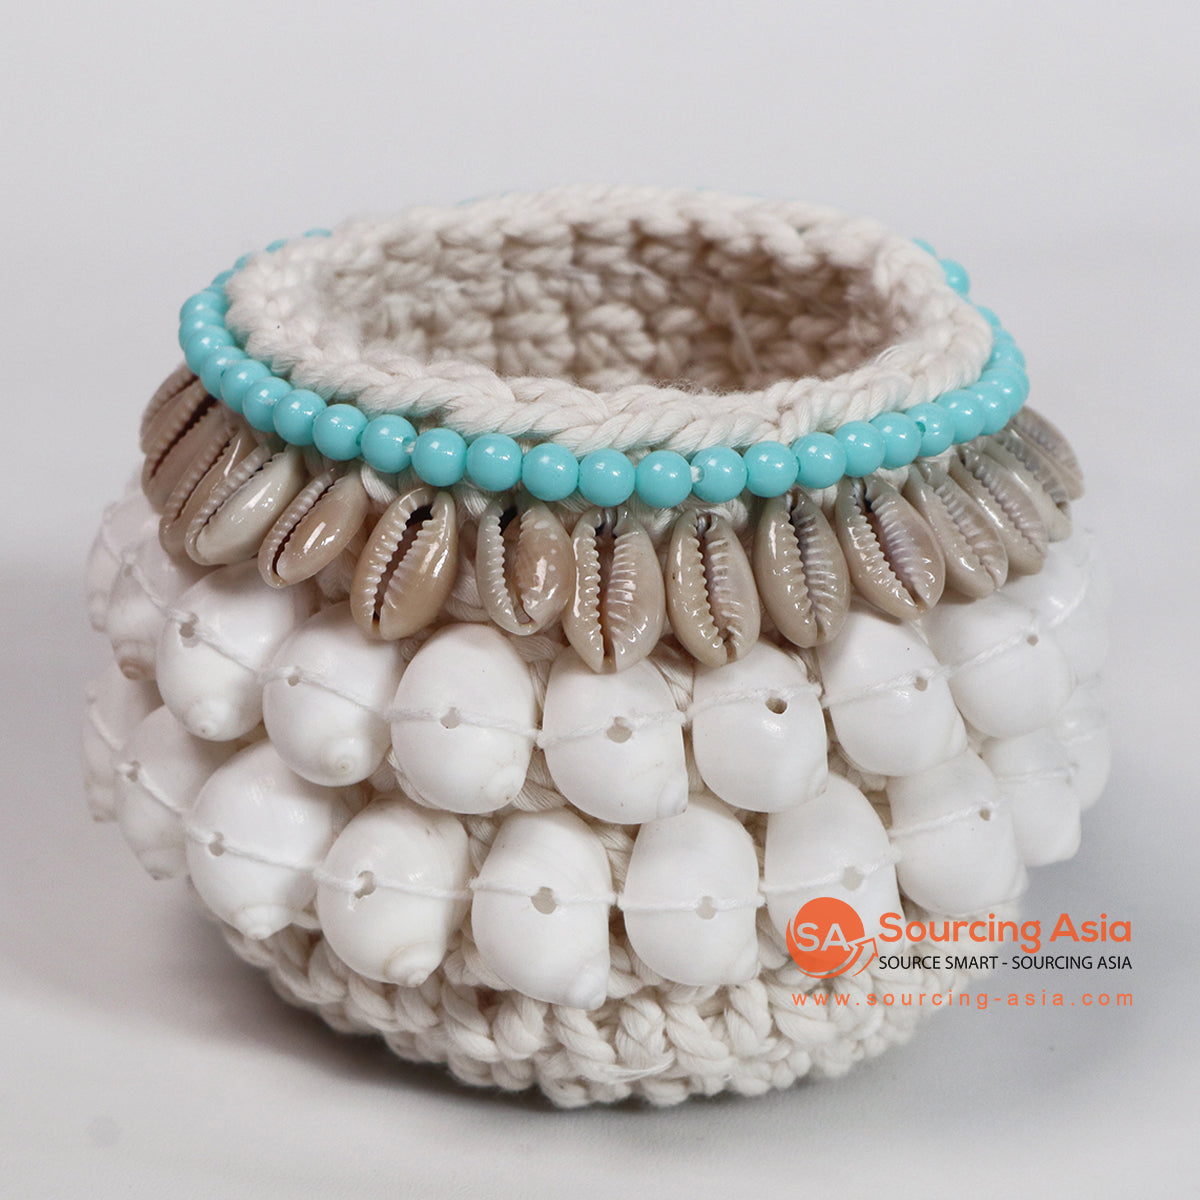 ROB014-1 NATURAL SHELL MACRAME BOTTLE HOLDER WITH BLUE BEADING